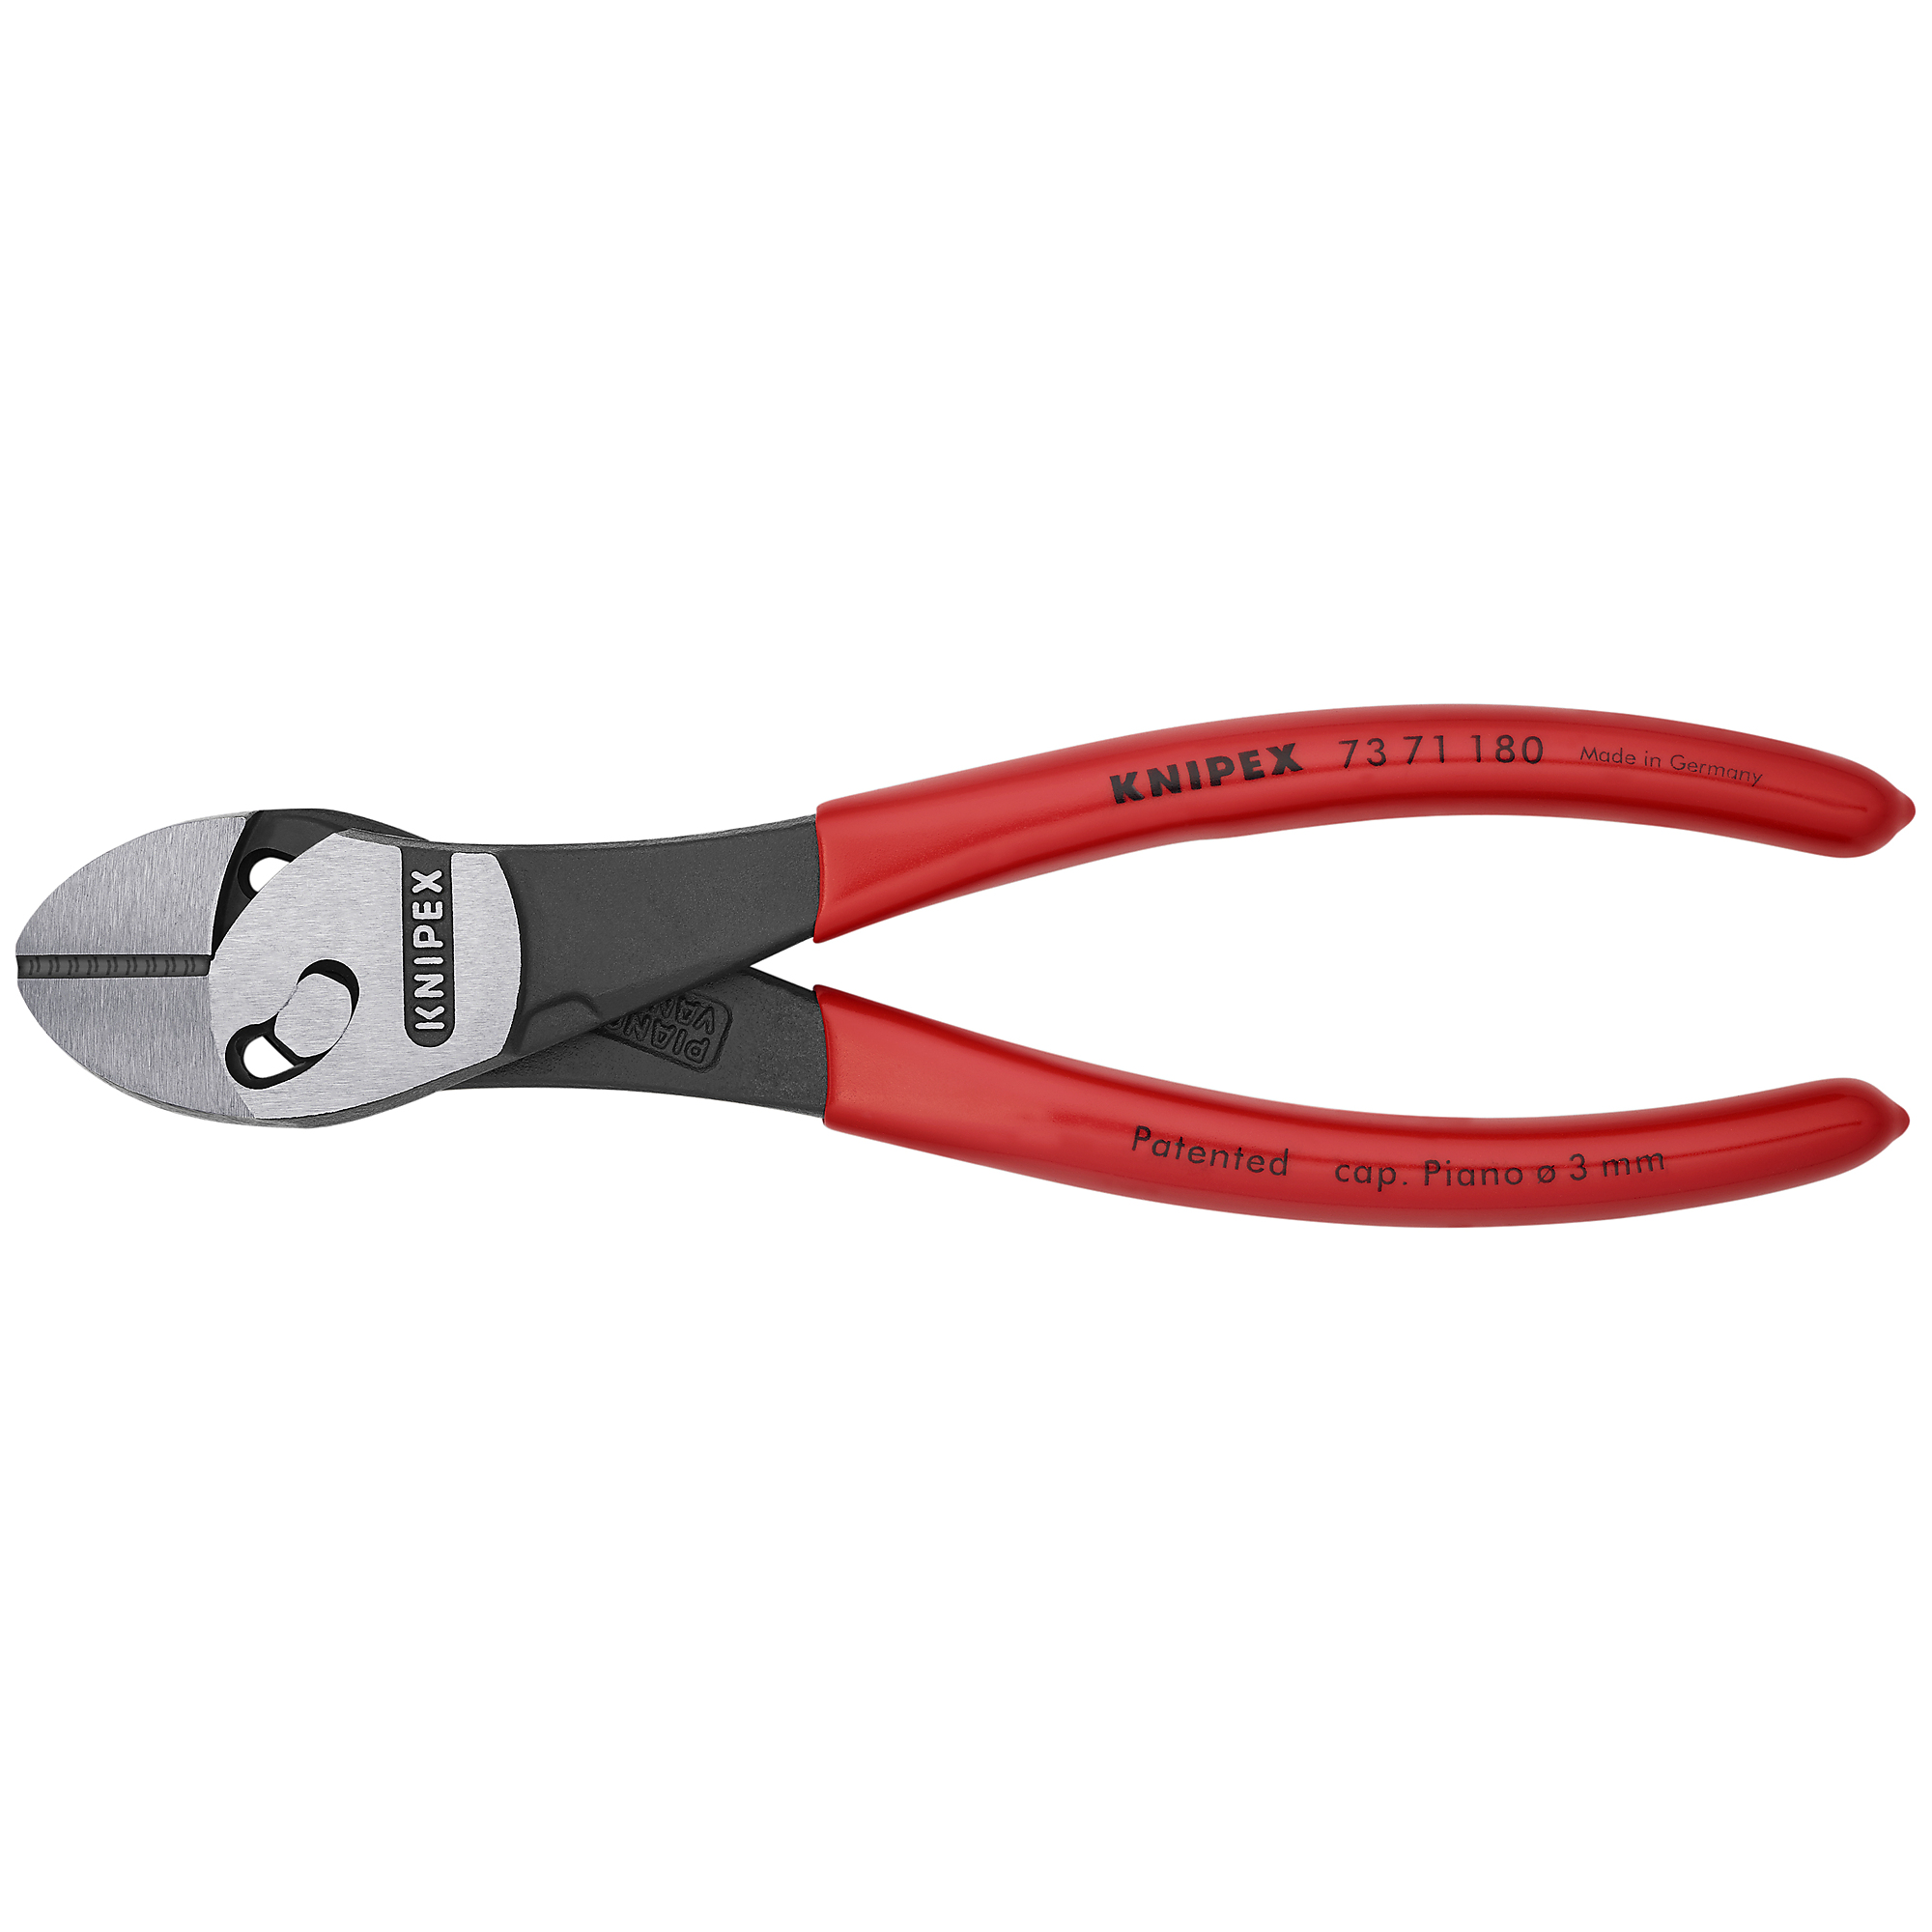 KNIPEX Twinforce , Twinforce Diagonal Super Cutters, 7.25Inch, Pieces (qty.) 1 Material Steel, Jaw Capacity 0.219 in, Model 73 71 180